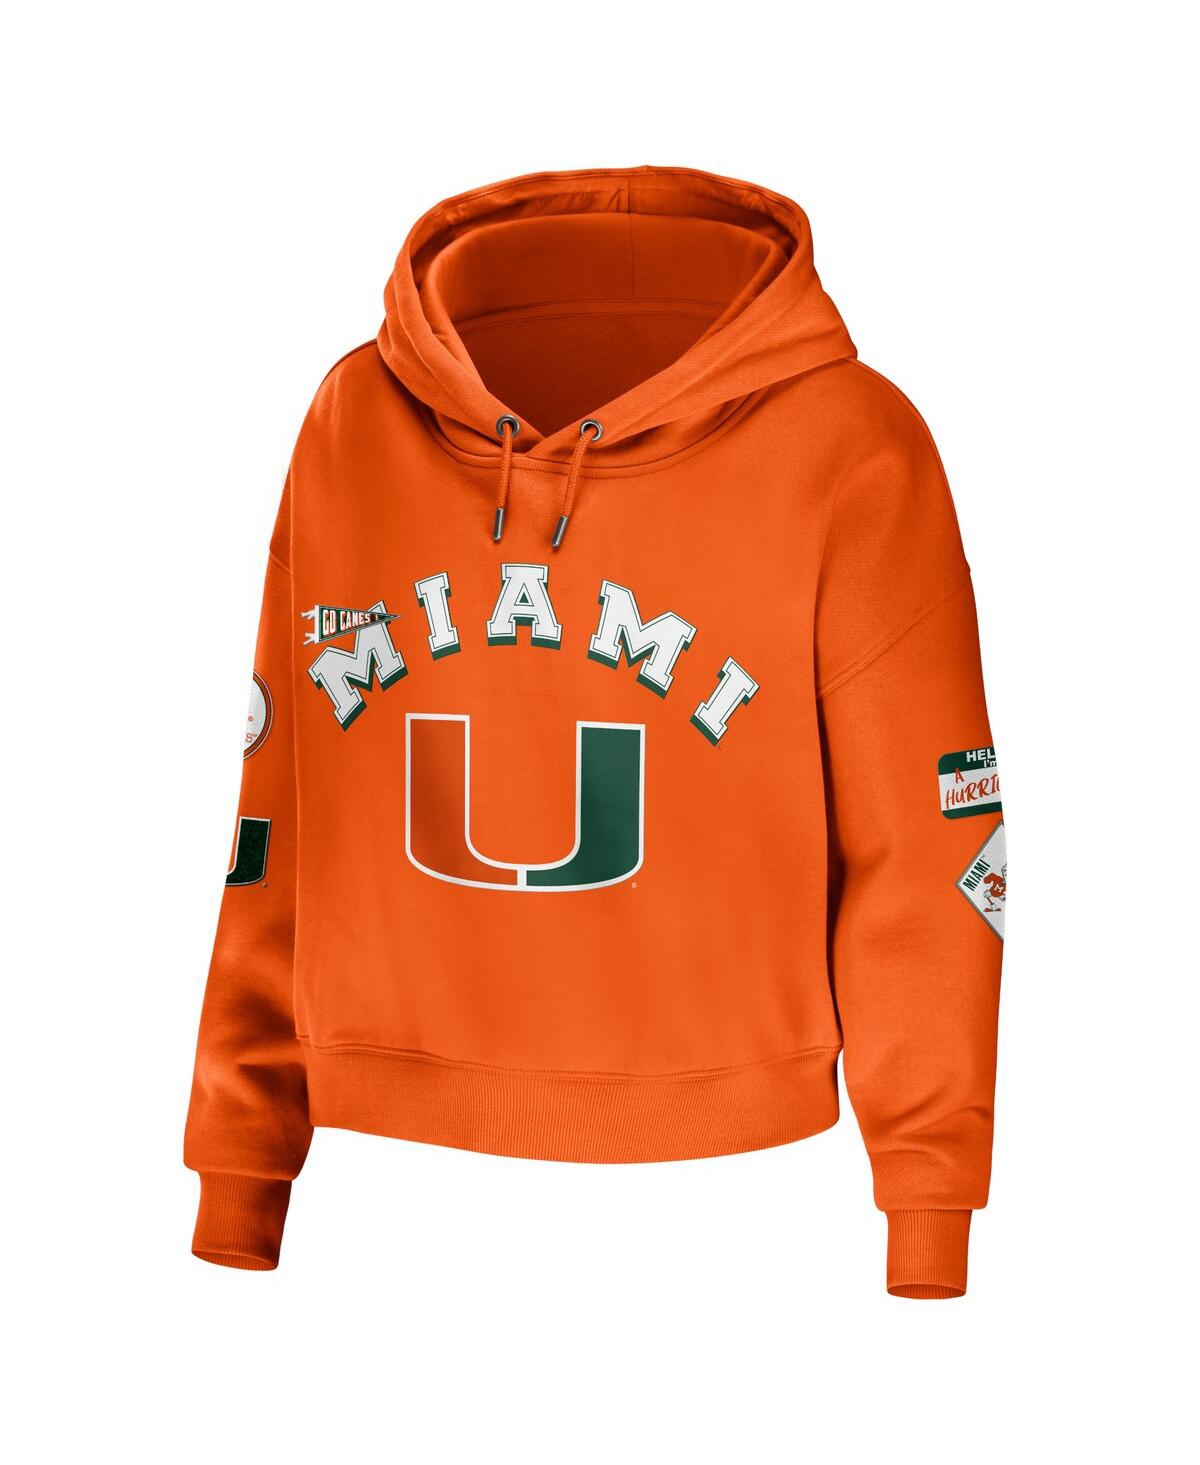 Shop Wear By Erin Andrews Women's  Orange Miami Hurricanes Mixed Media Cropped Pullover Hoodie